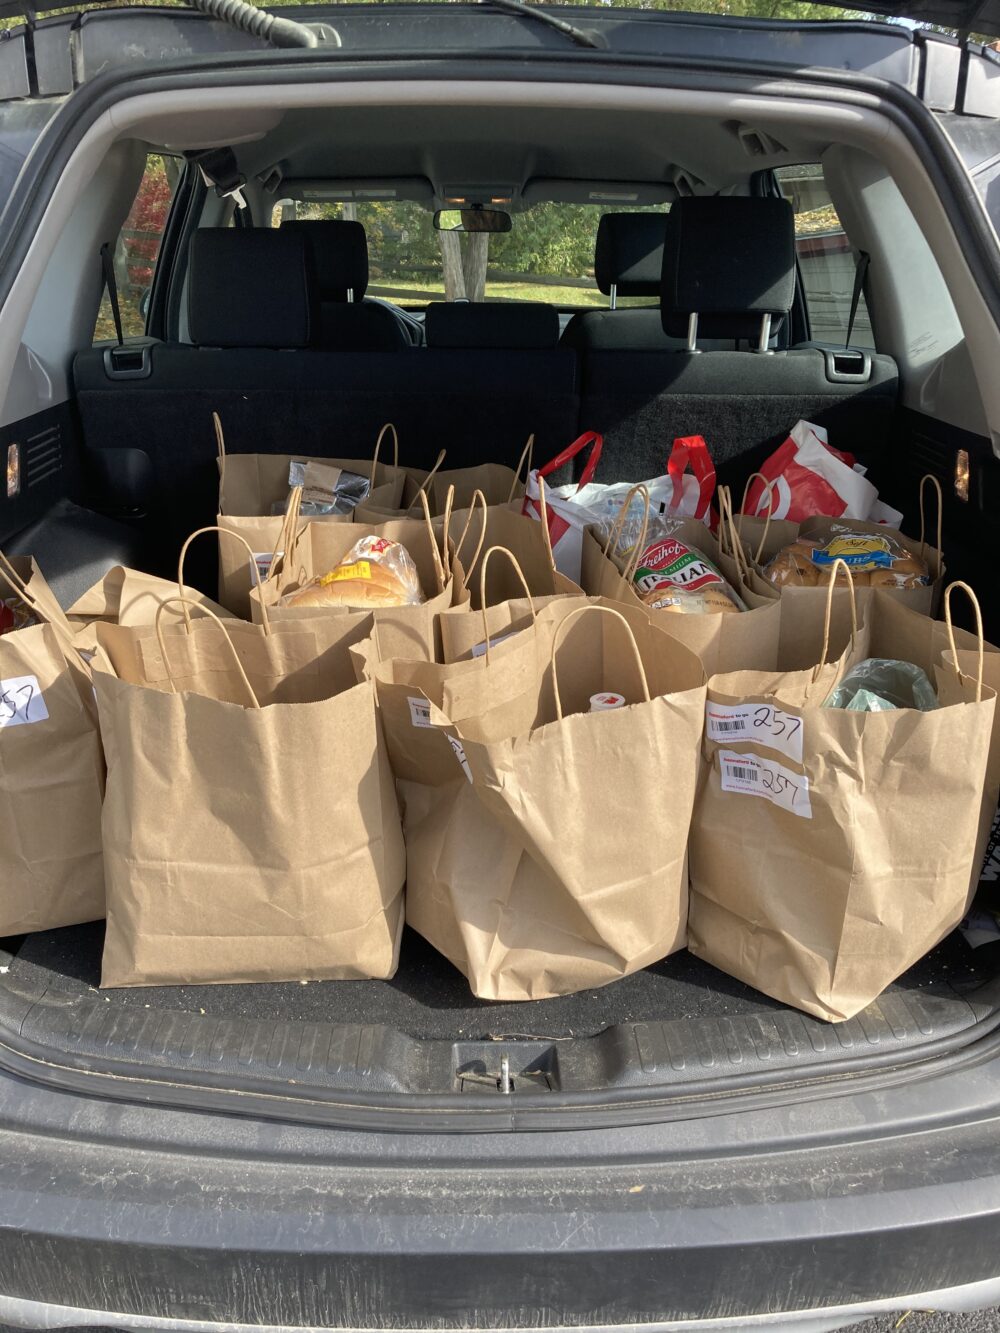 Paper grocery bags from a grocery pickup order are shown in the trunk of a vehicle.